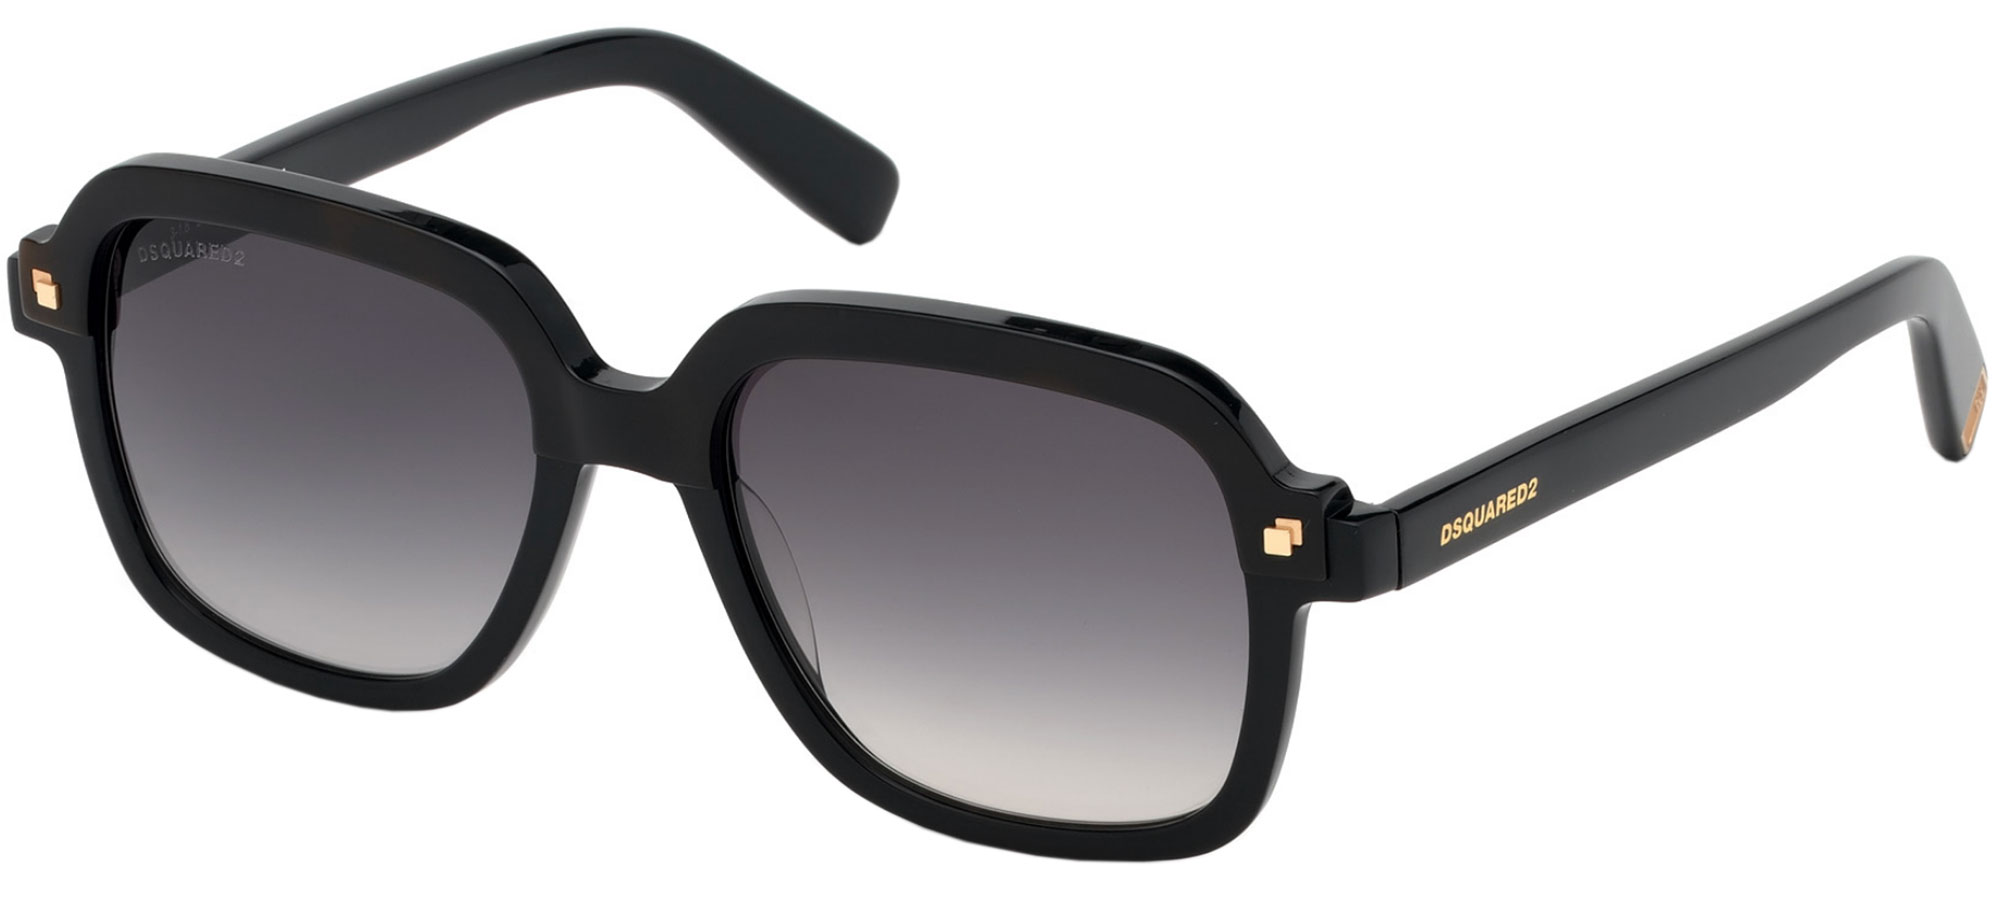 Dsquared2MILES DQ 0304Black/grey Shaded (01B A)